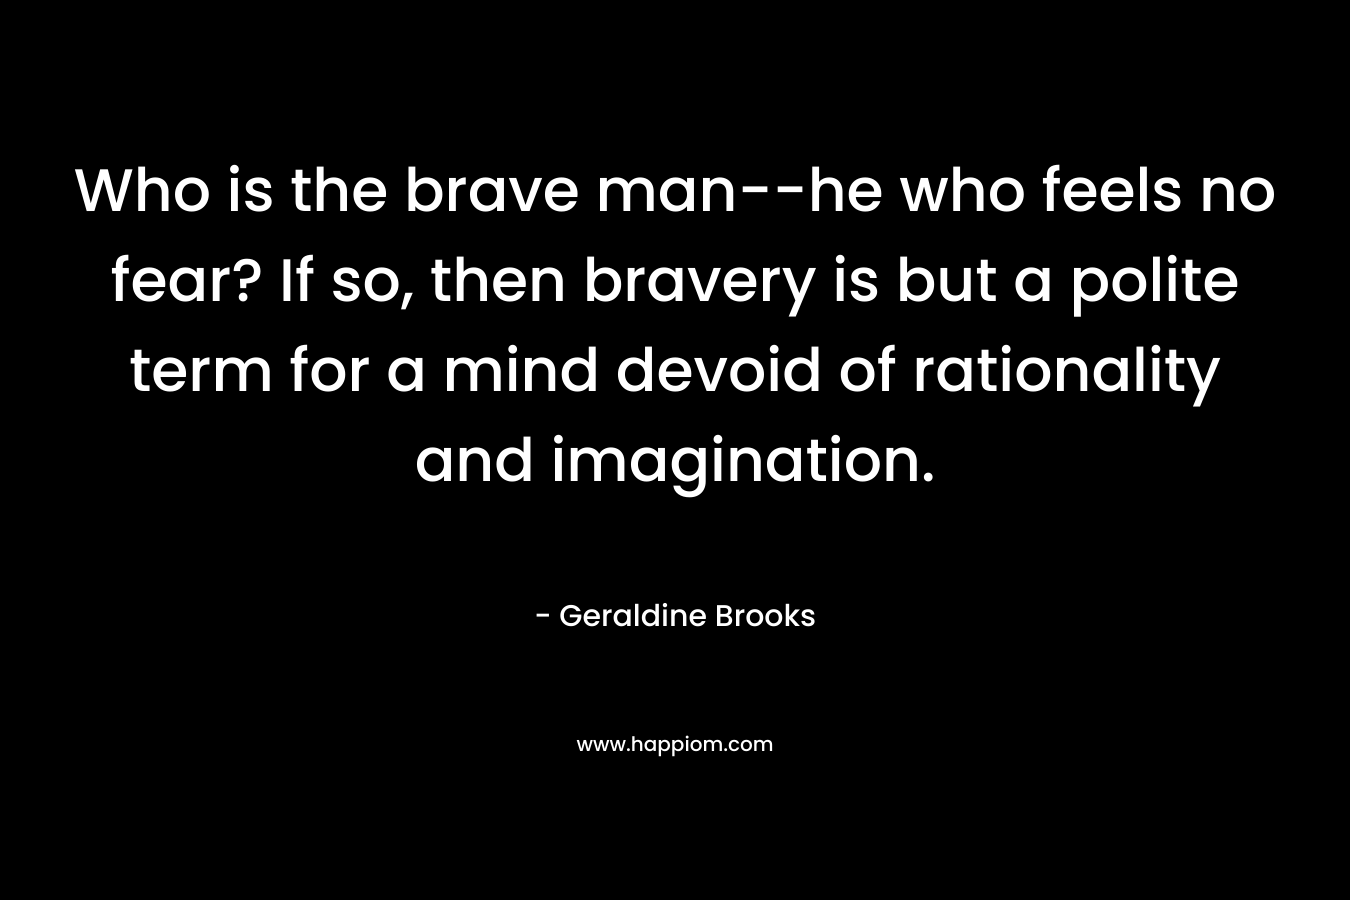 Who is the brave man--he who feels no fear? If so, then bravery is but a polite term for a mind devoid of rationality and imagination.